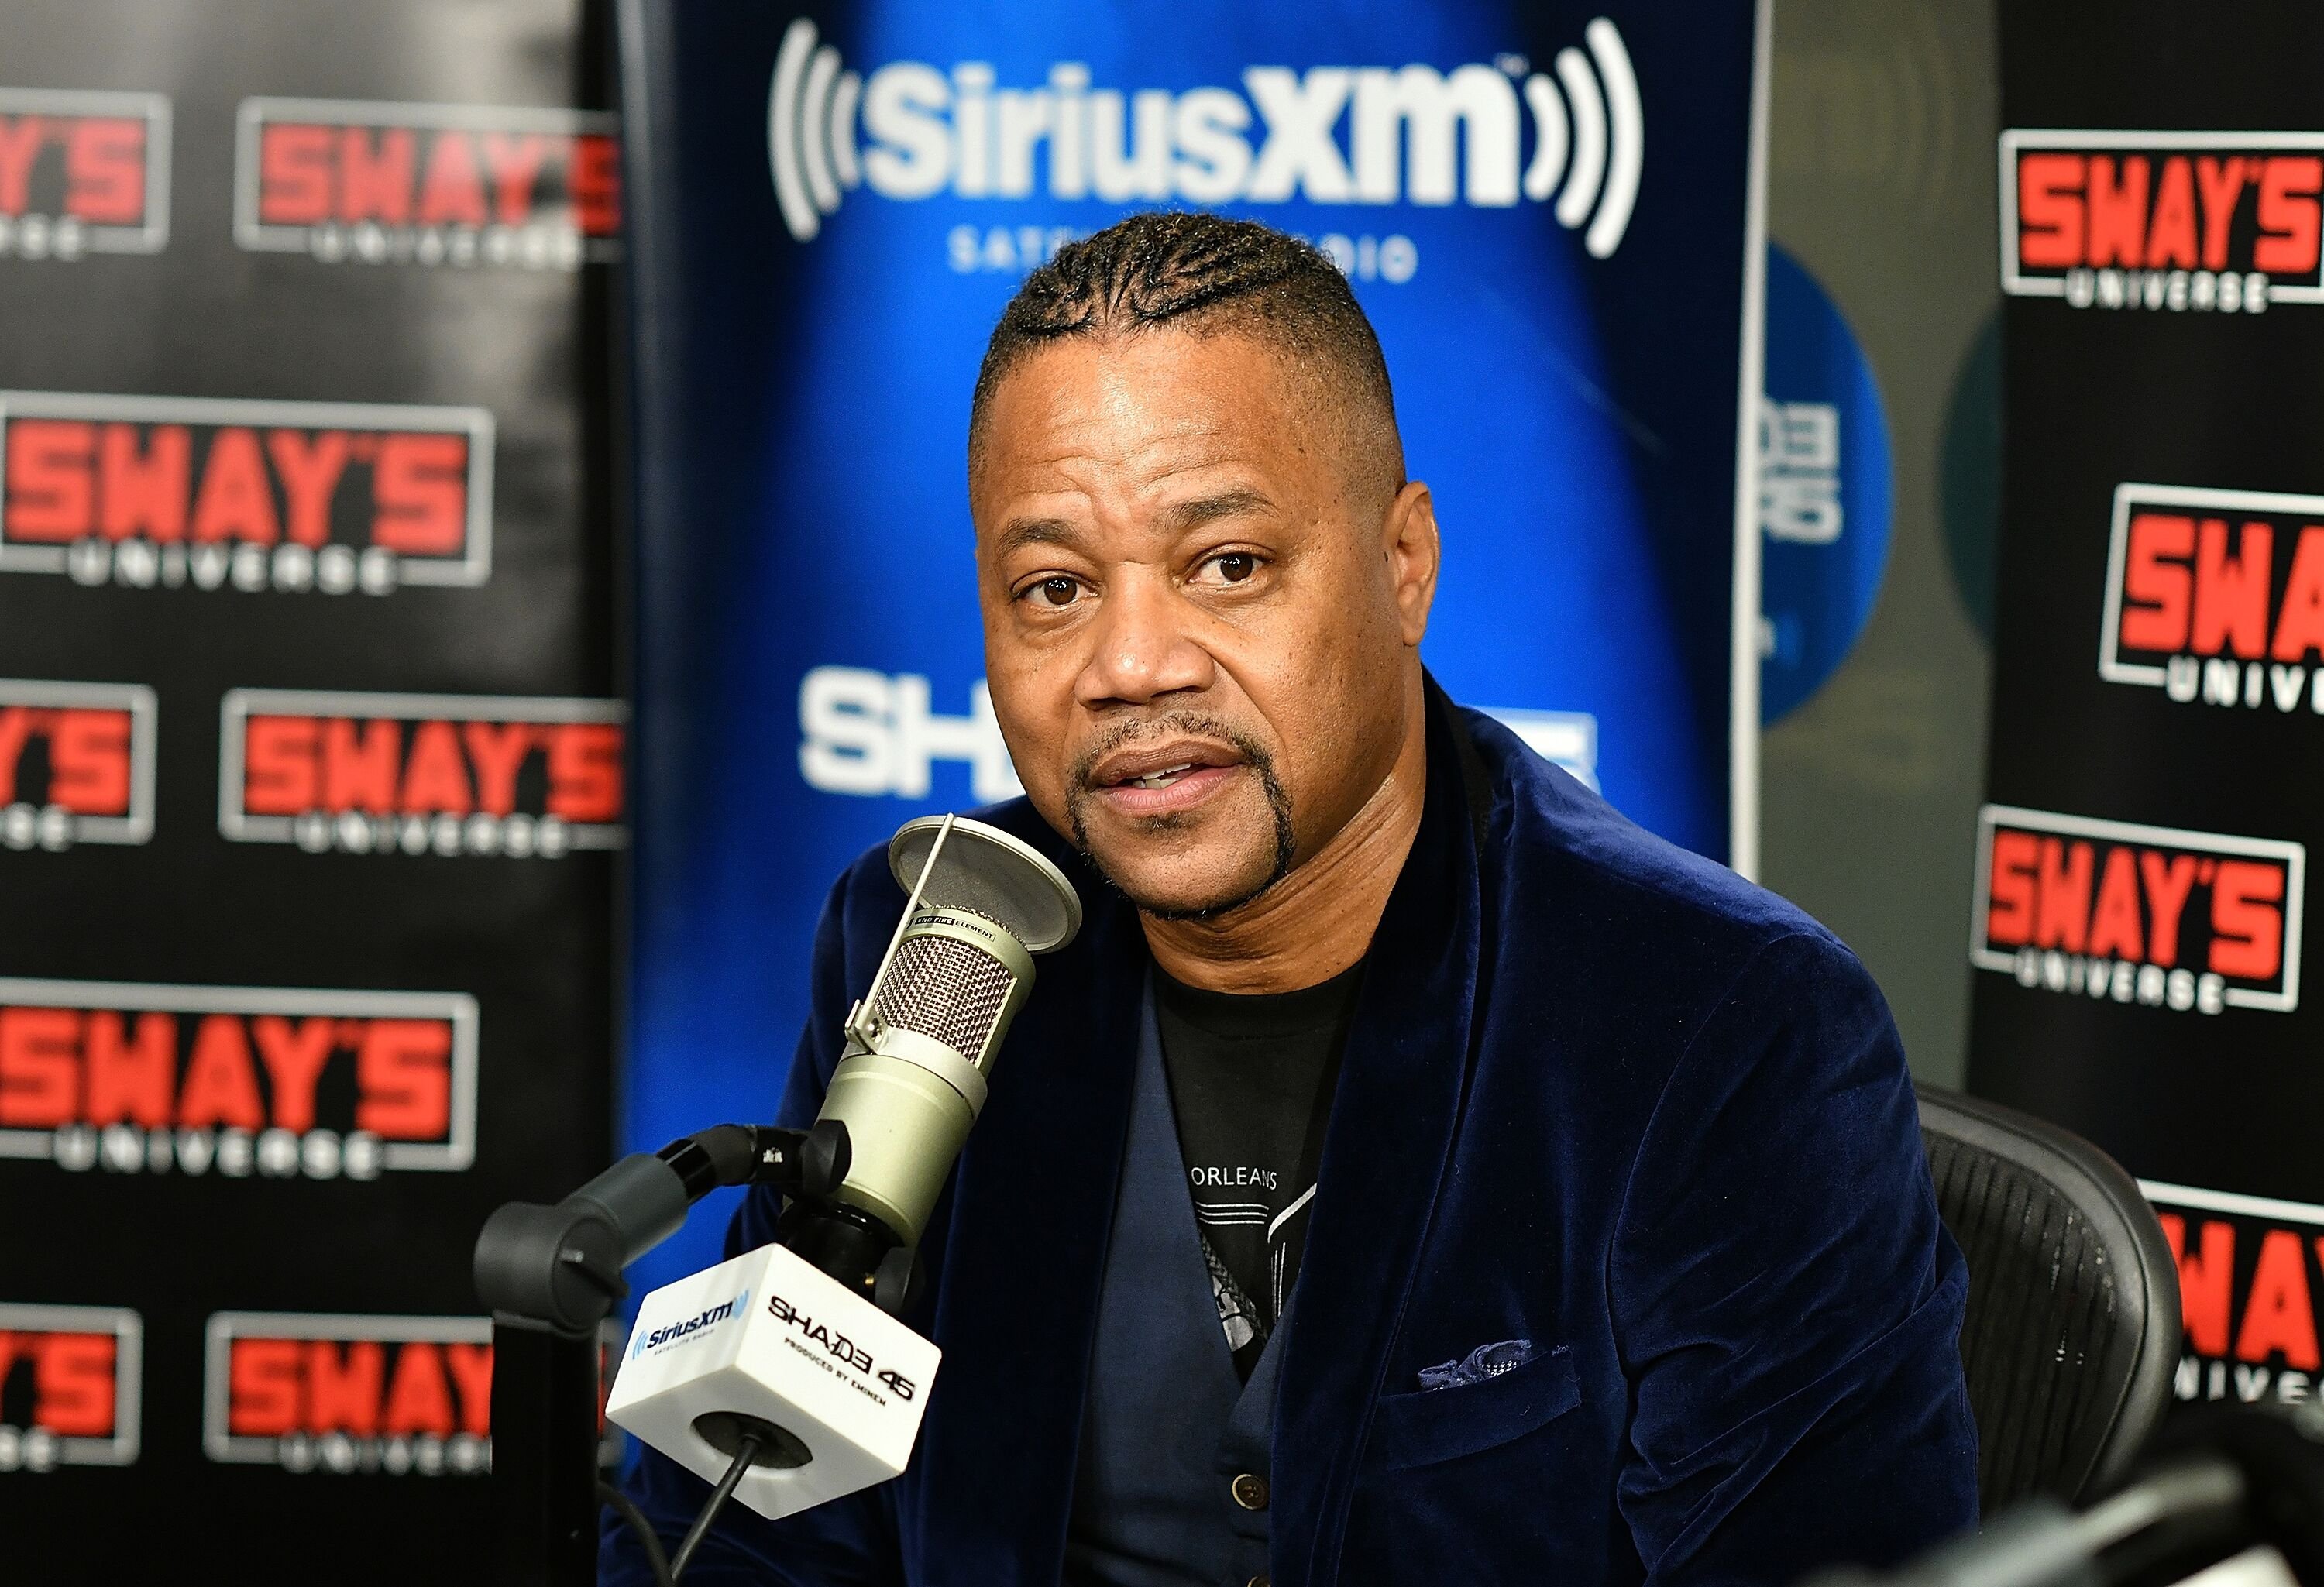 Cuba Gooding Jr being interviewed by Sirius XM radio/ Source: Getty Images